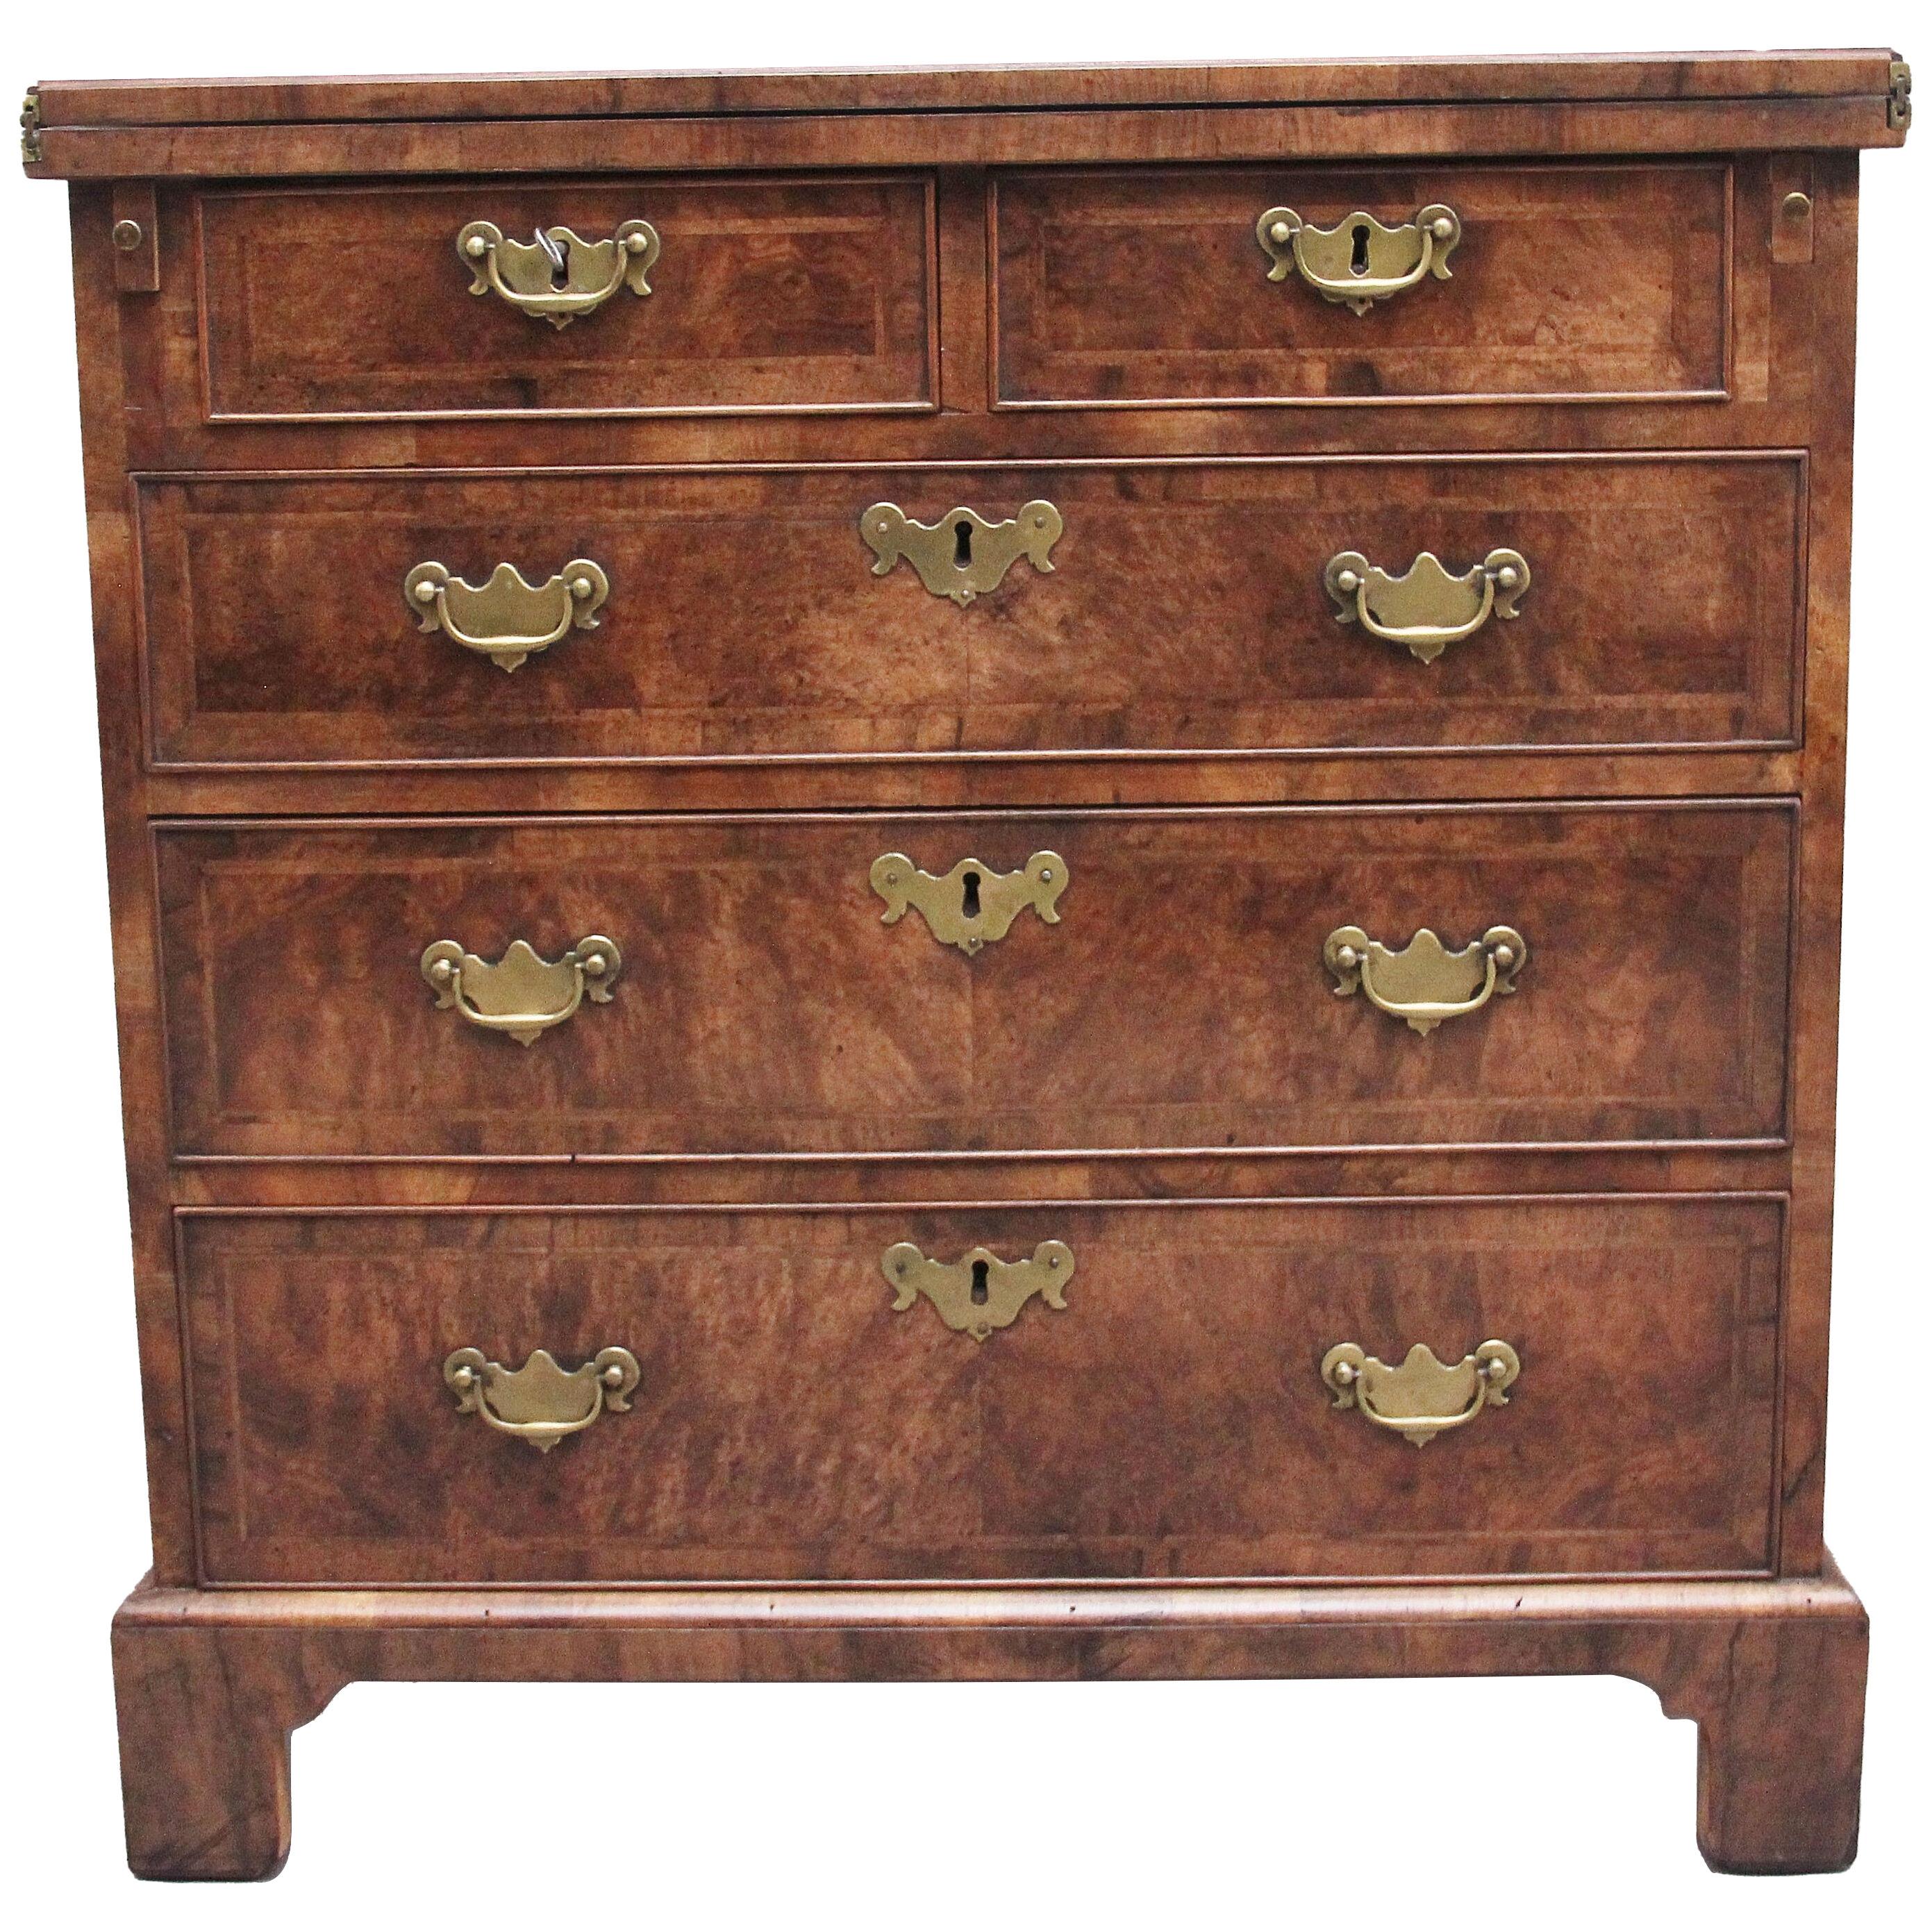 Early 20th Century walnut bachelors chest